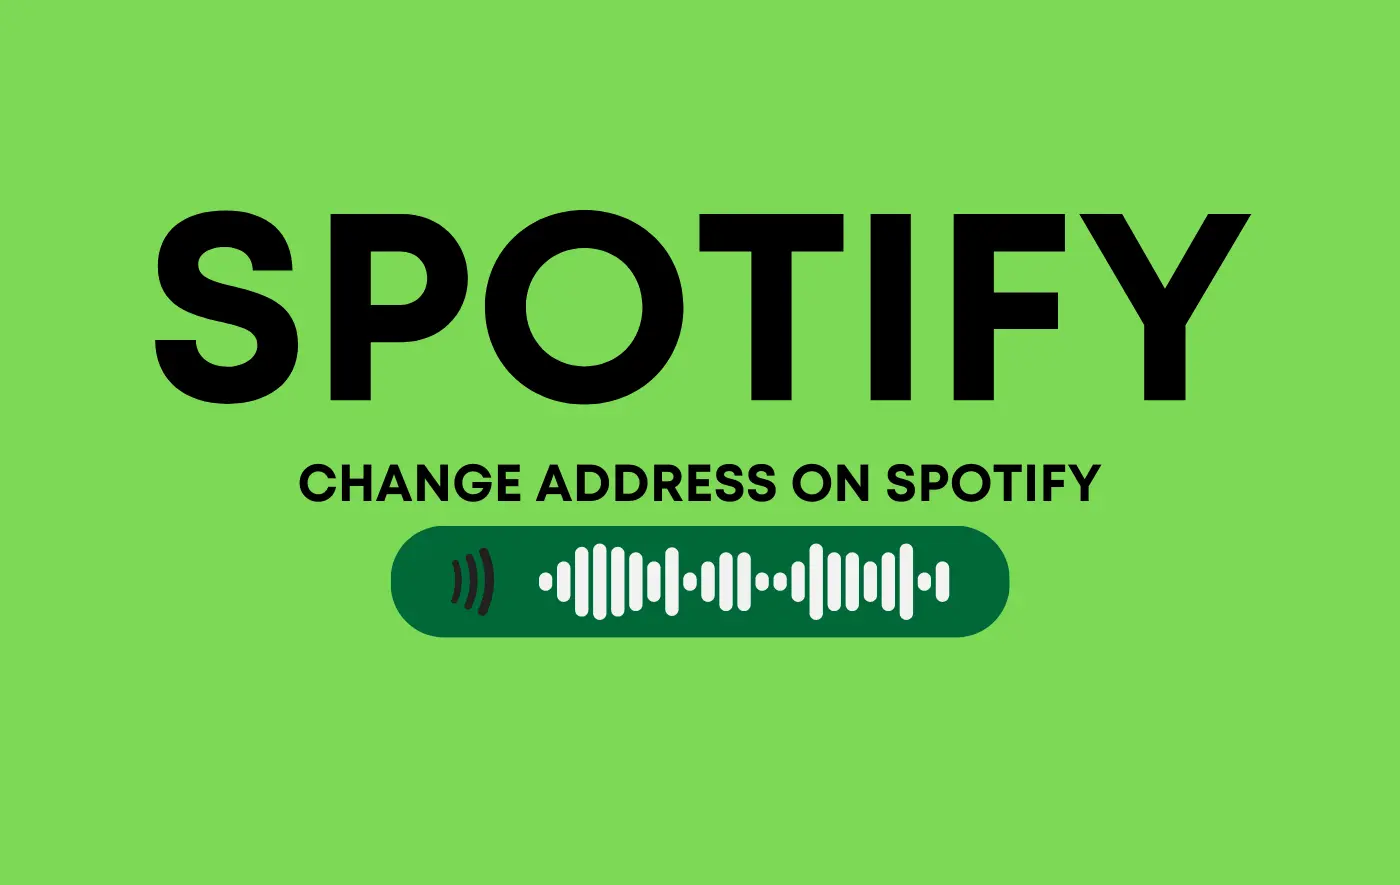 How to Change Address on Spotify